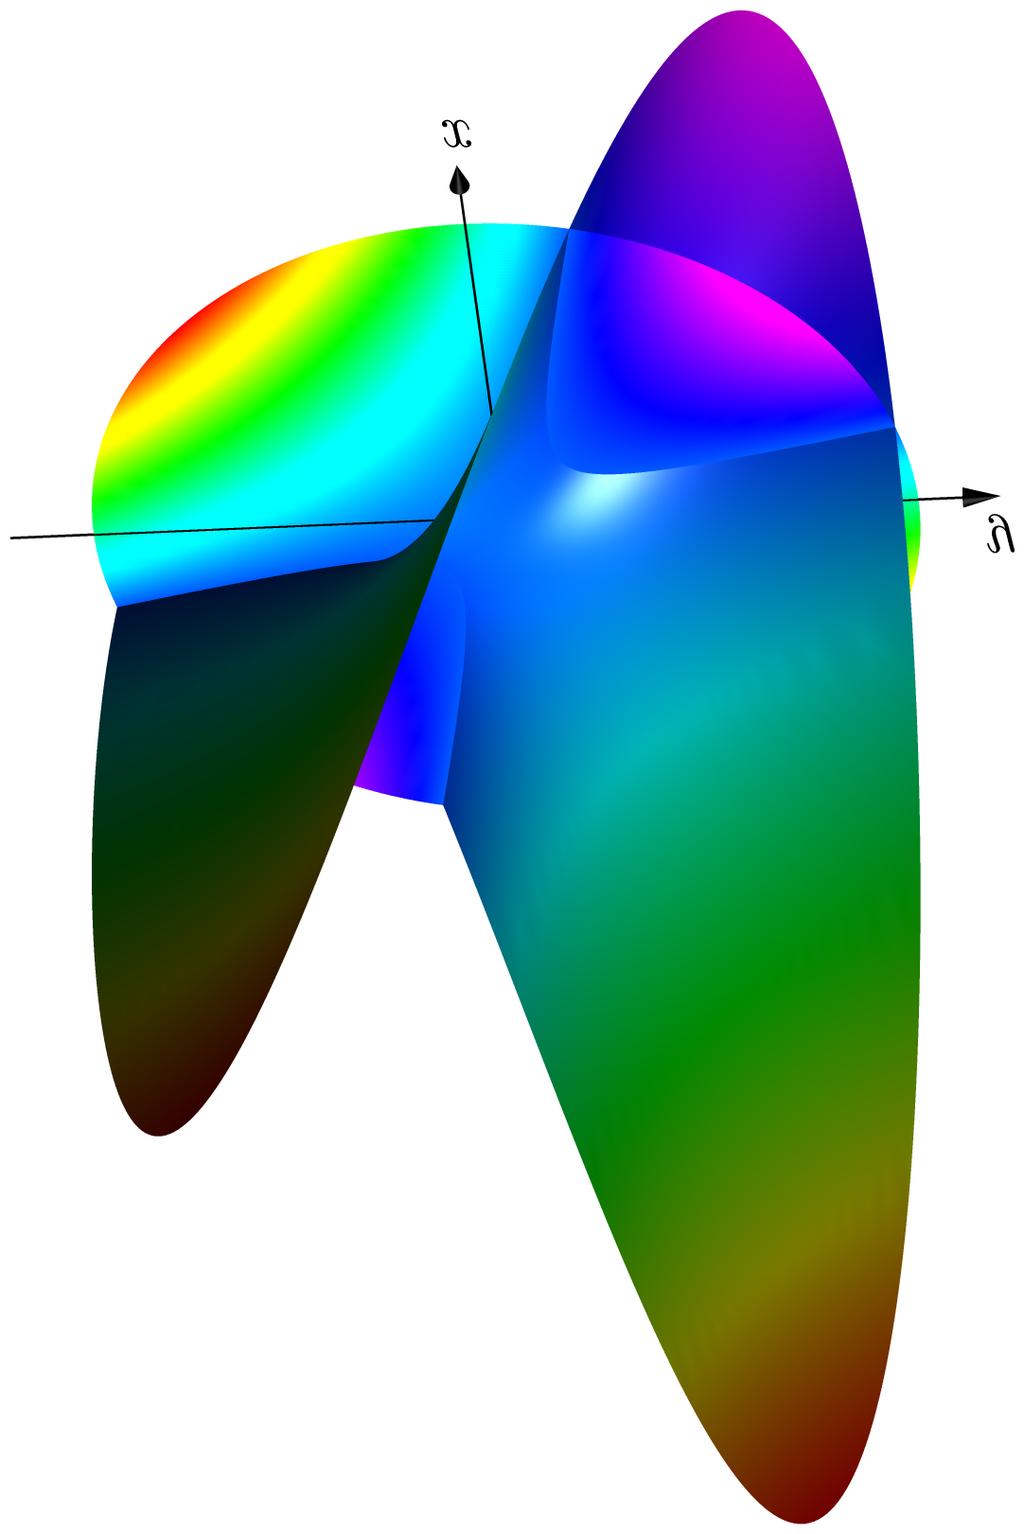 (a) The graph and a colour density plot of the function f(x, y) from Problem 5 over the disk D = {x 2 + y 2 25}.